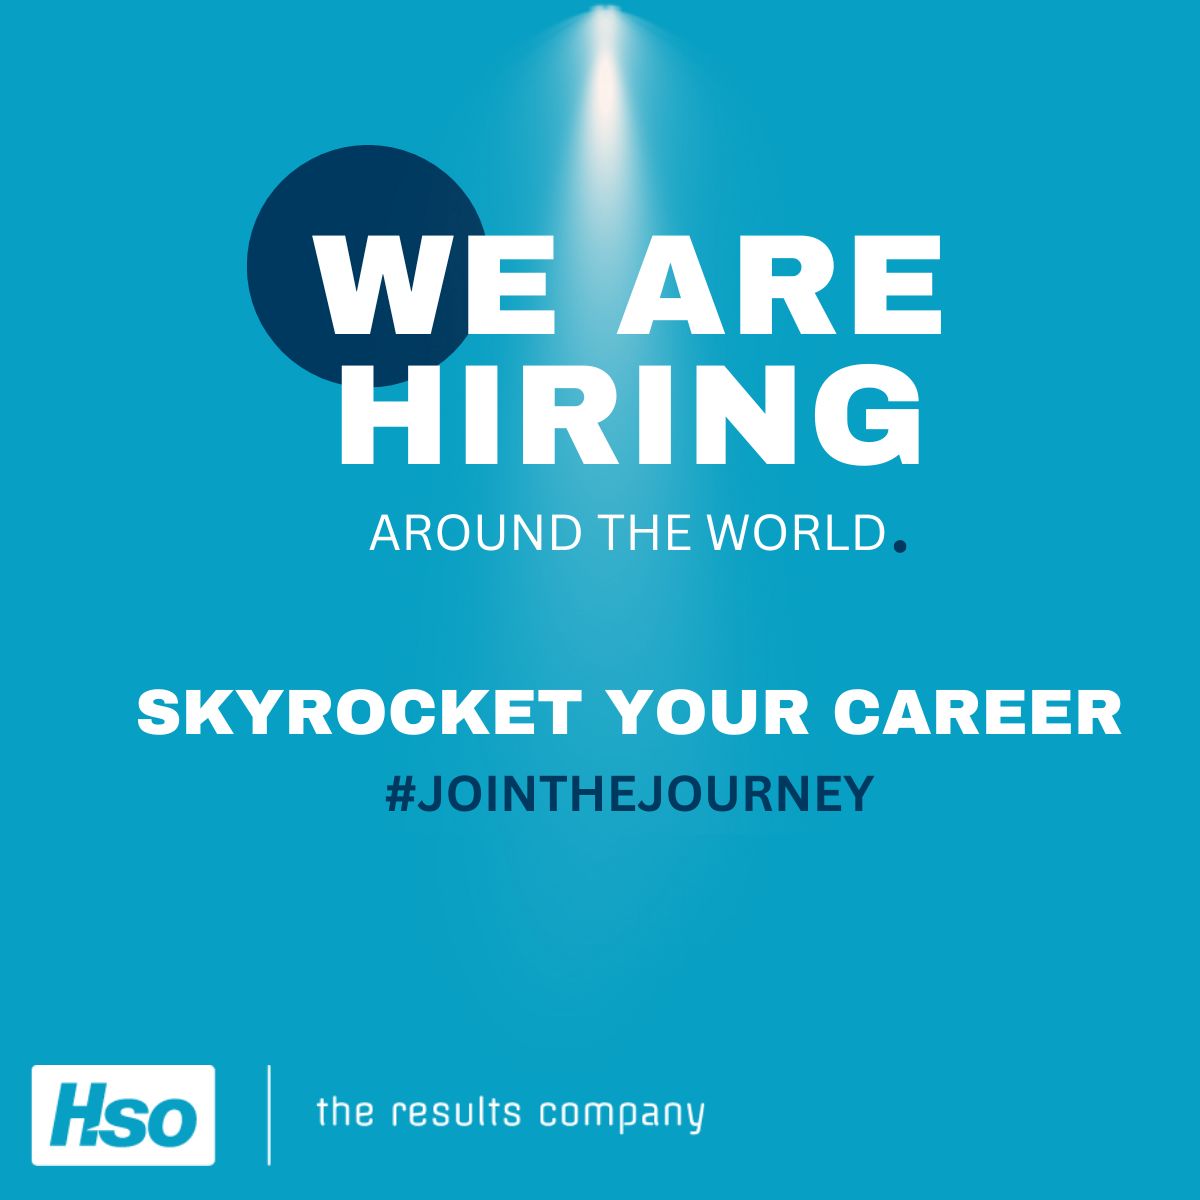 🚀 #JoinTheJourney and #SkyRocketYourCareer as Senior Consultant Professional Services (m/w/d) Microsoft Dynamics 365 🚀 #IT #jobs #HSO #career #growth #remoteworking #careersintech #consulting #digitaltransformation #D365 #bundesweit #joinourteam hso.com/de/karriere/st…